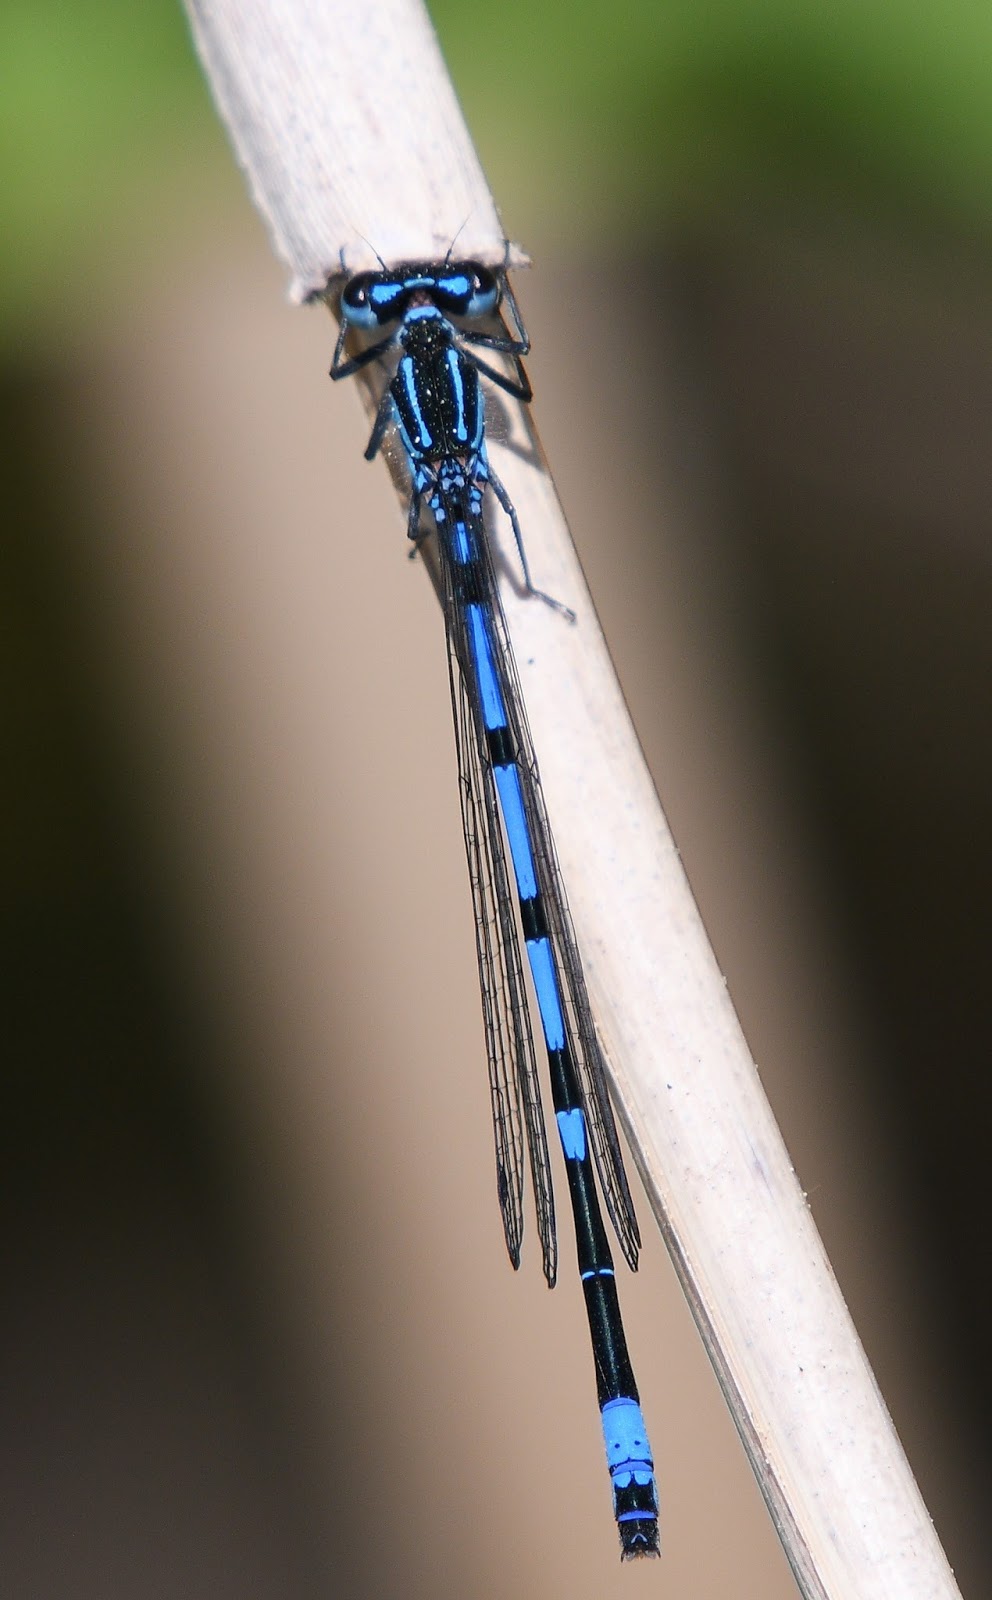 Picture of a dragonfly up close.